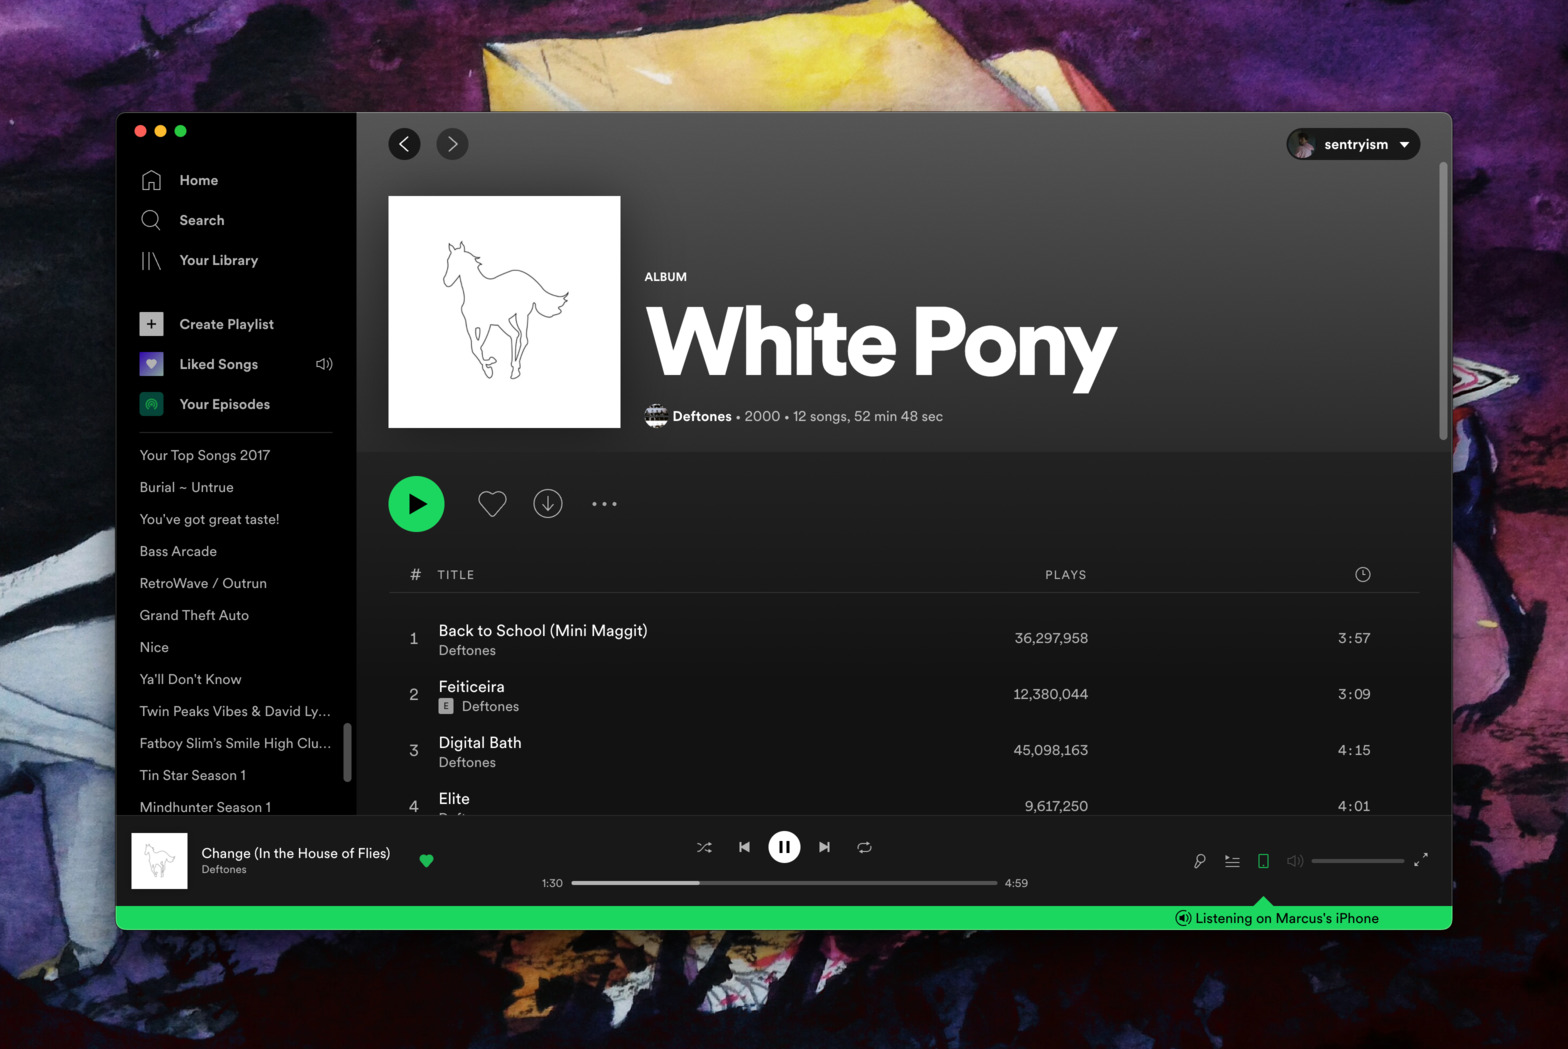 A screenshot of the Spotify desktop client open to the album White Pony by the band Deftones. The track &ldquo;Change (In the House of Flies)&rdquo; is currently playing. At the bottom of the screen is a green banner that says &ldquo;Listening on Marcus&rsquo;s iPhone&rdquo;. This indicates that the user is able to remotely control the session from their desktop.